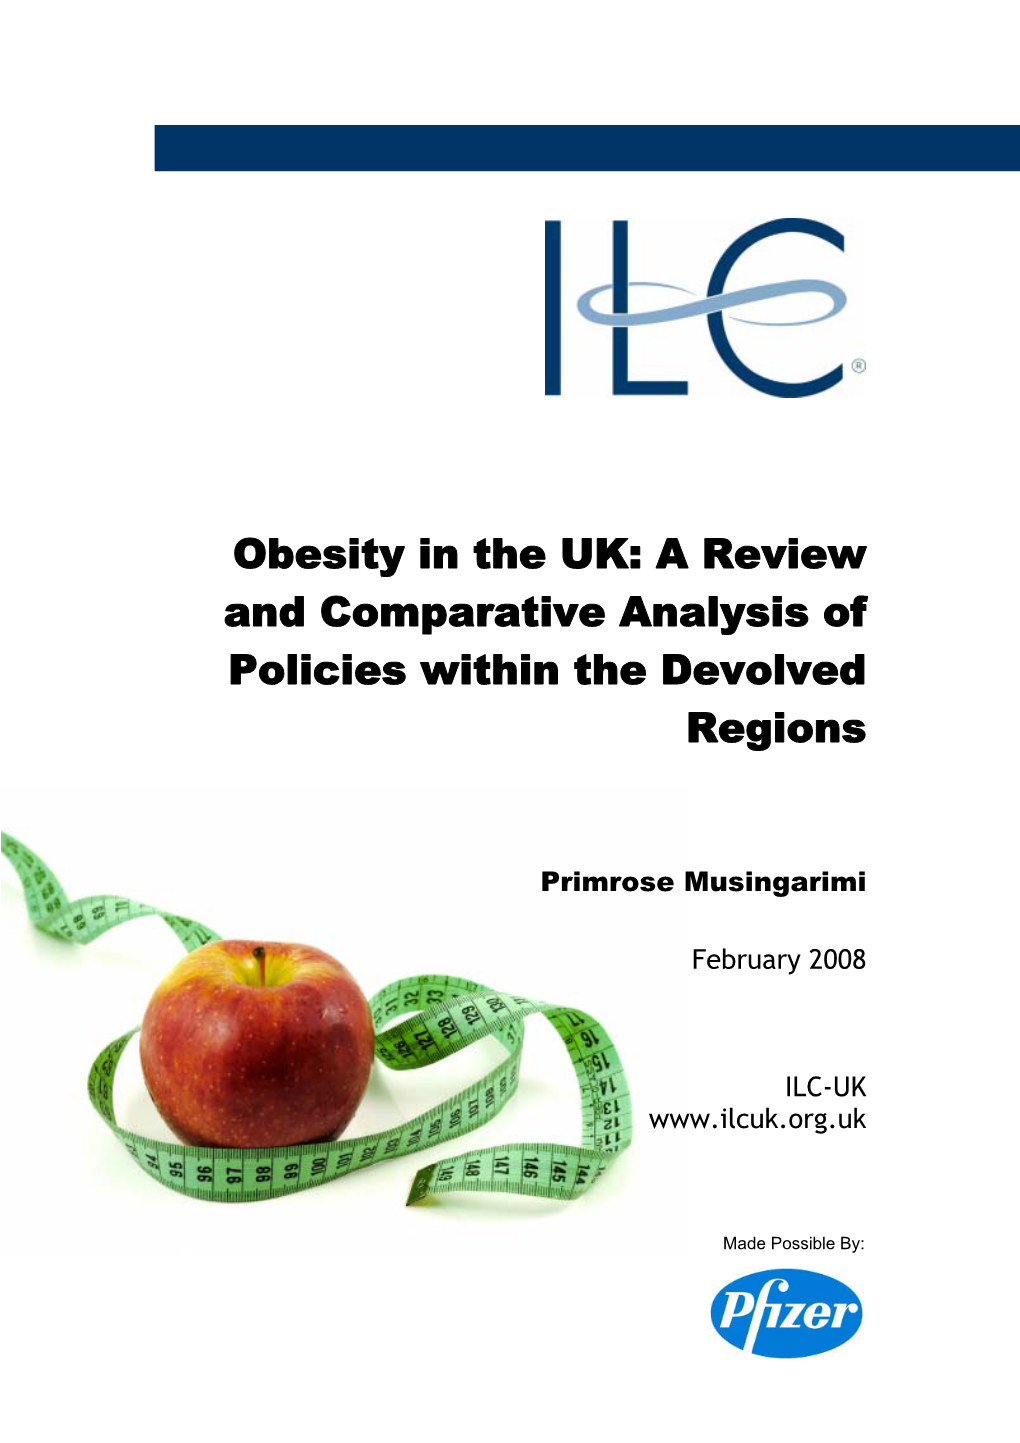 Obesity in the UK: a Review and Comparative Analysis of Policies Within the Devolved Regions